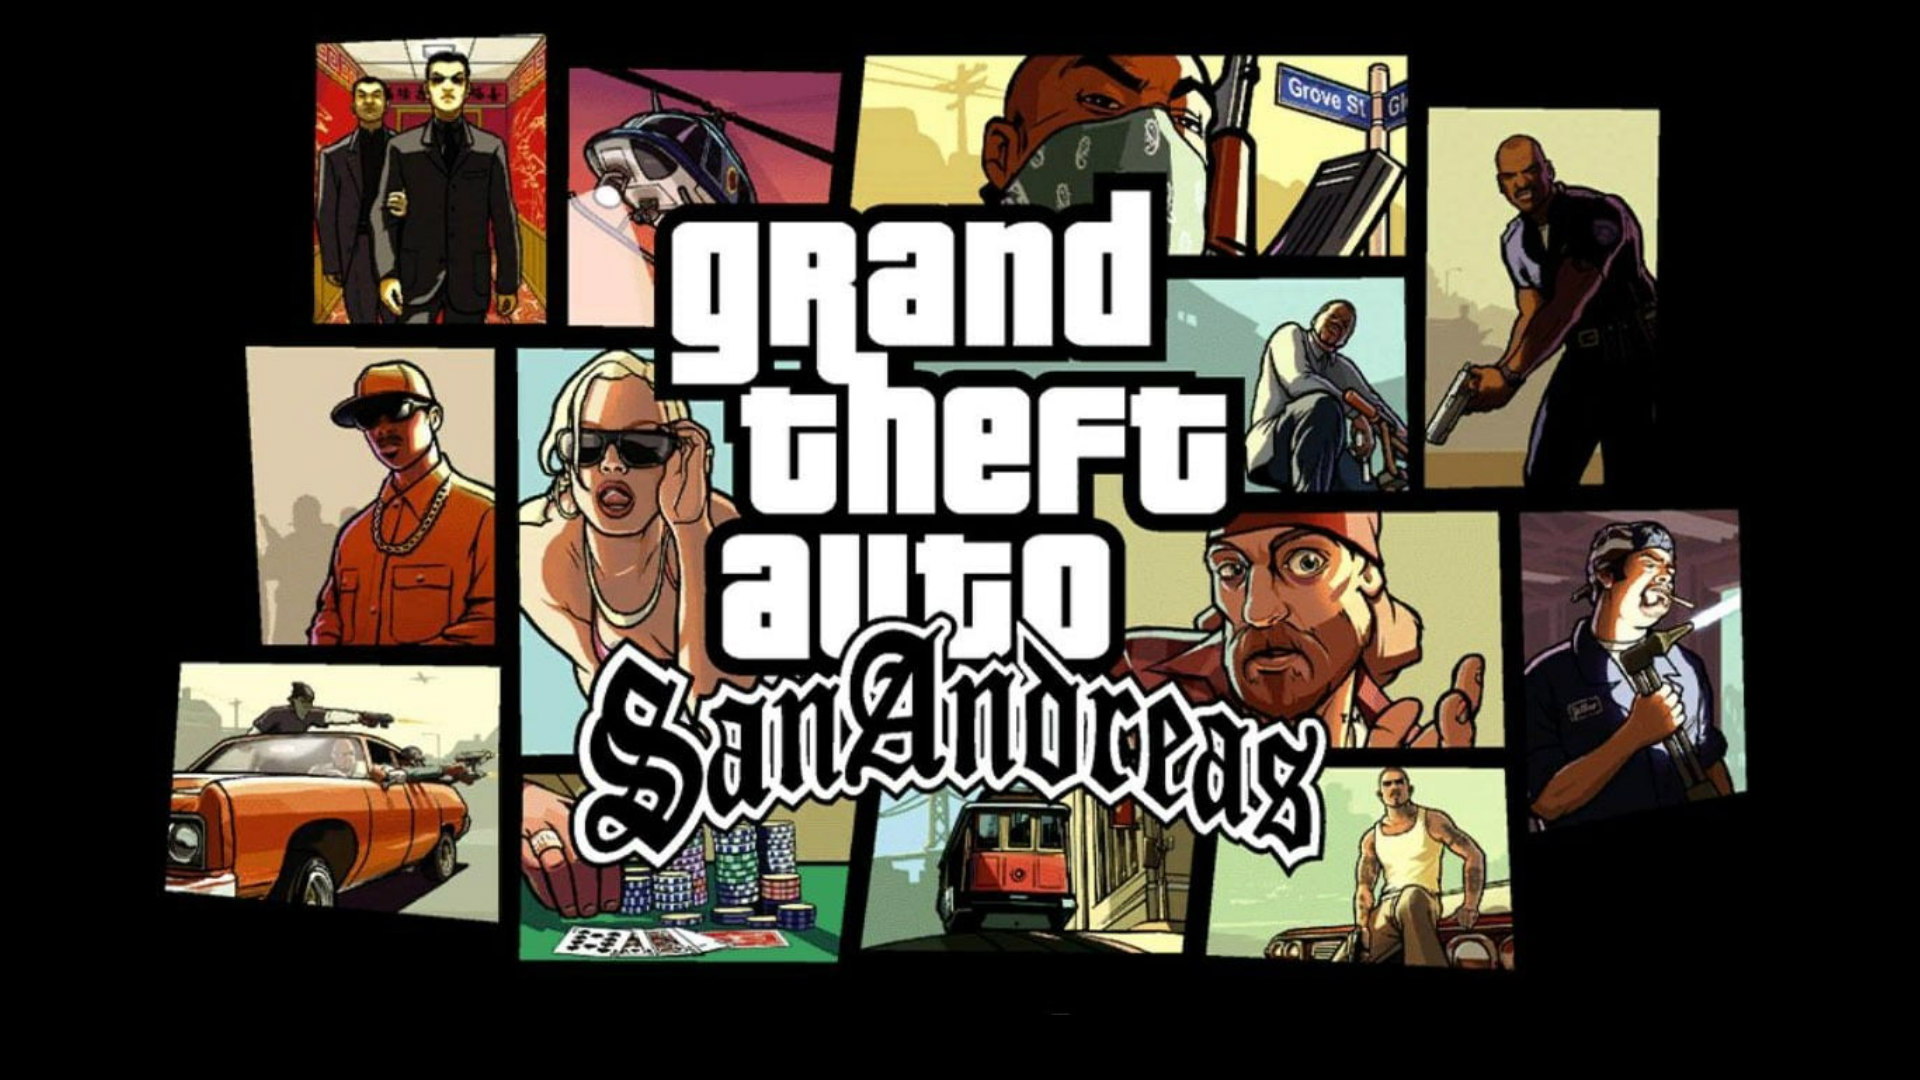 GTA San Andreas just got a new update which might indicate